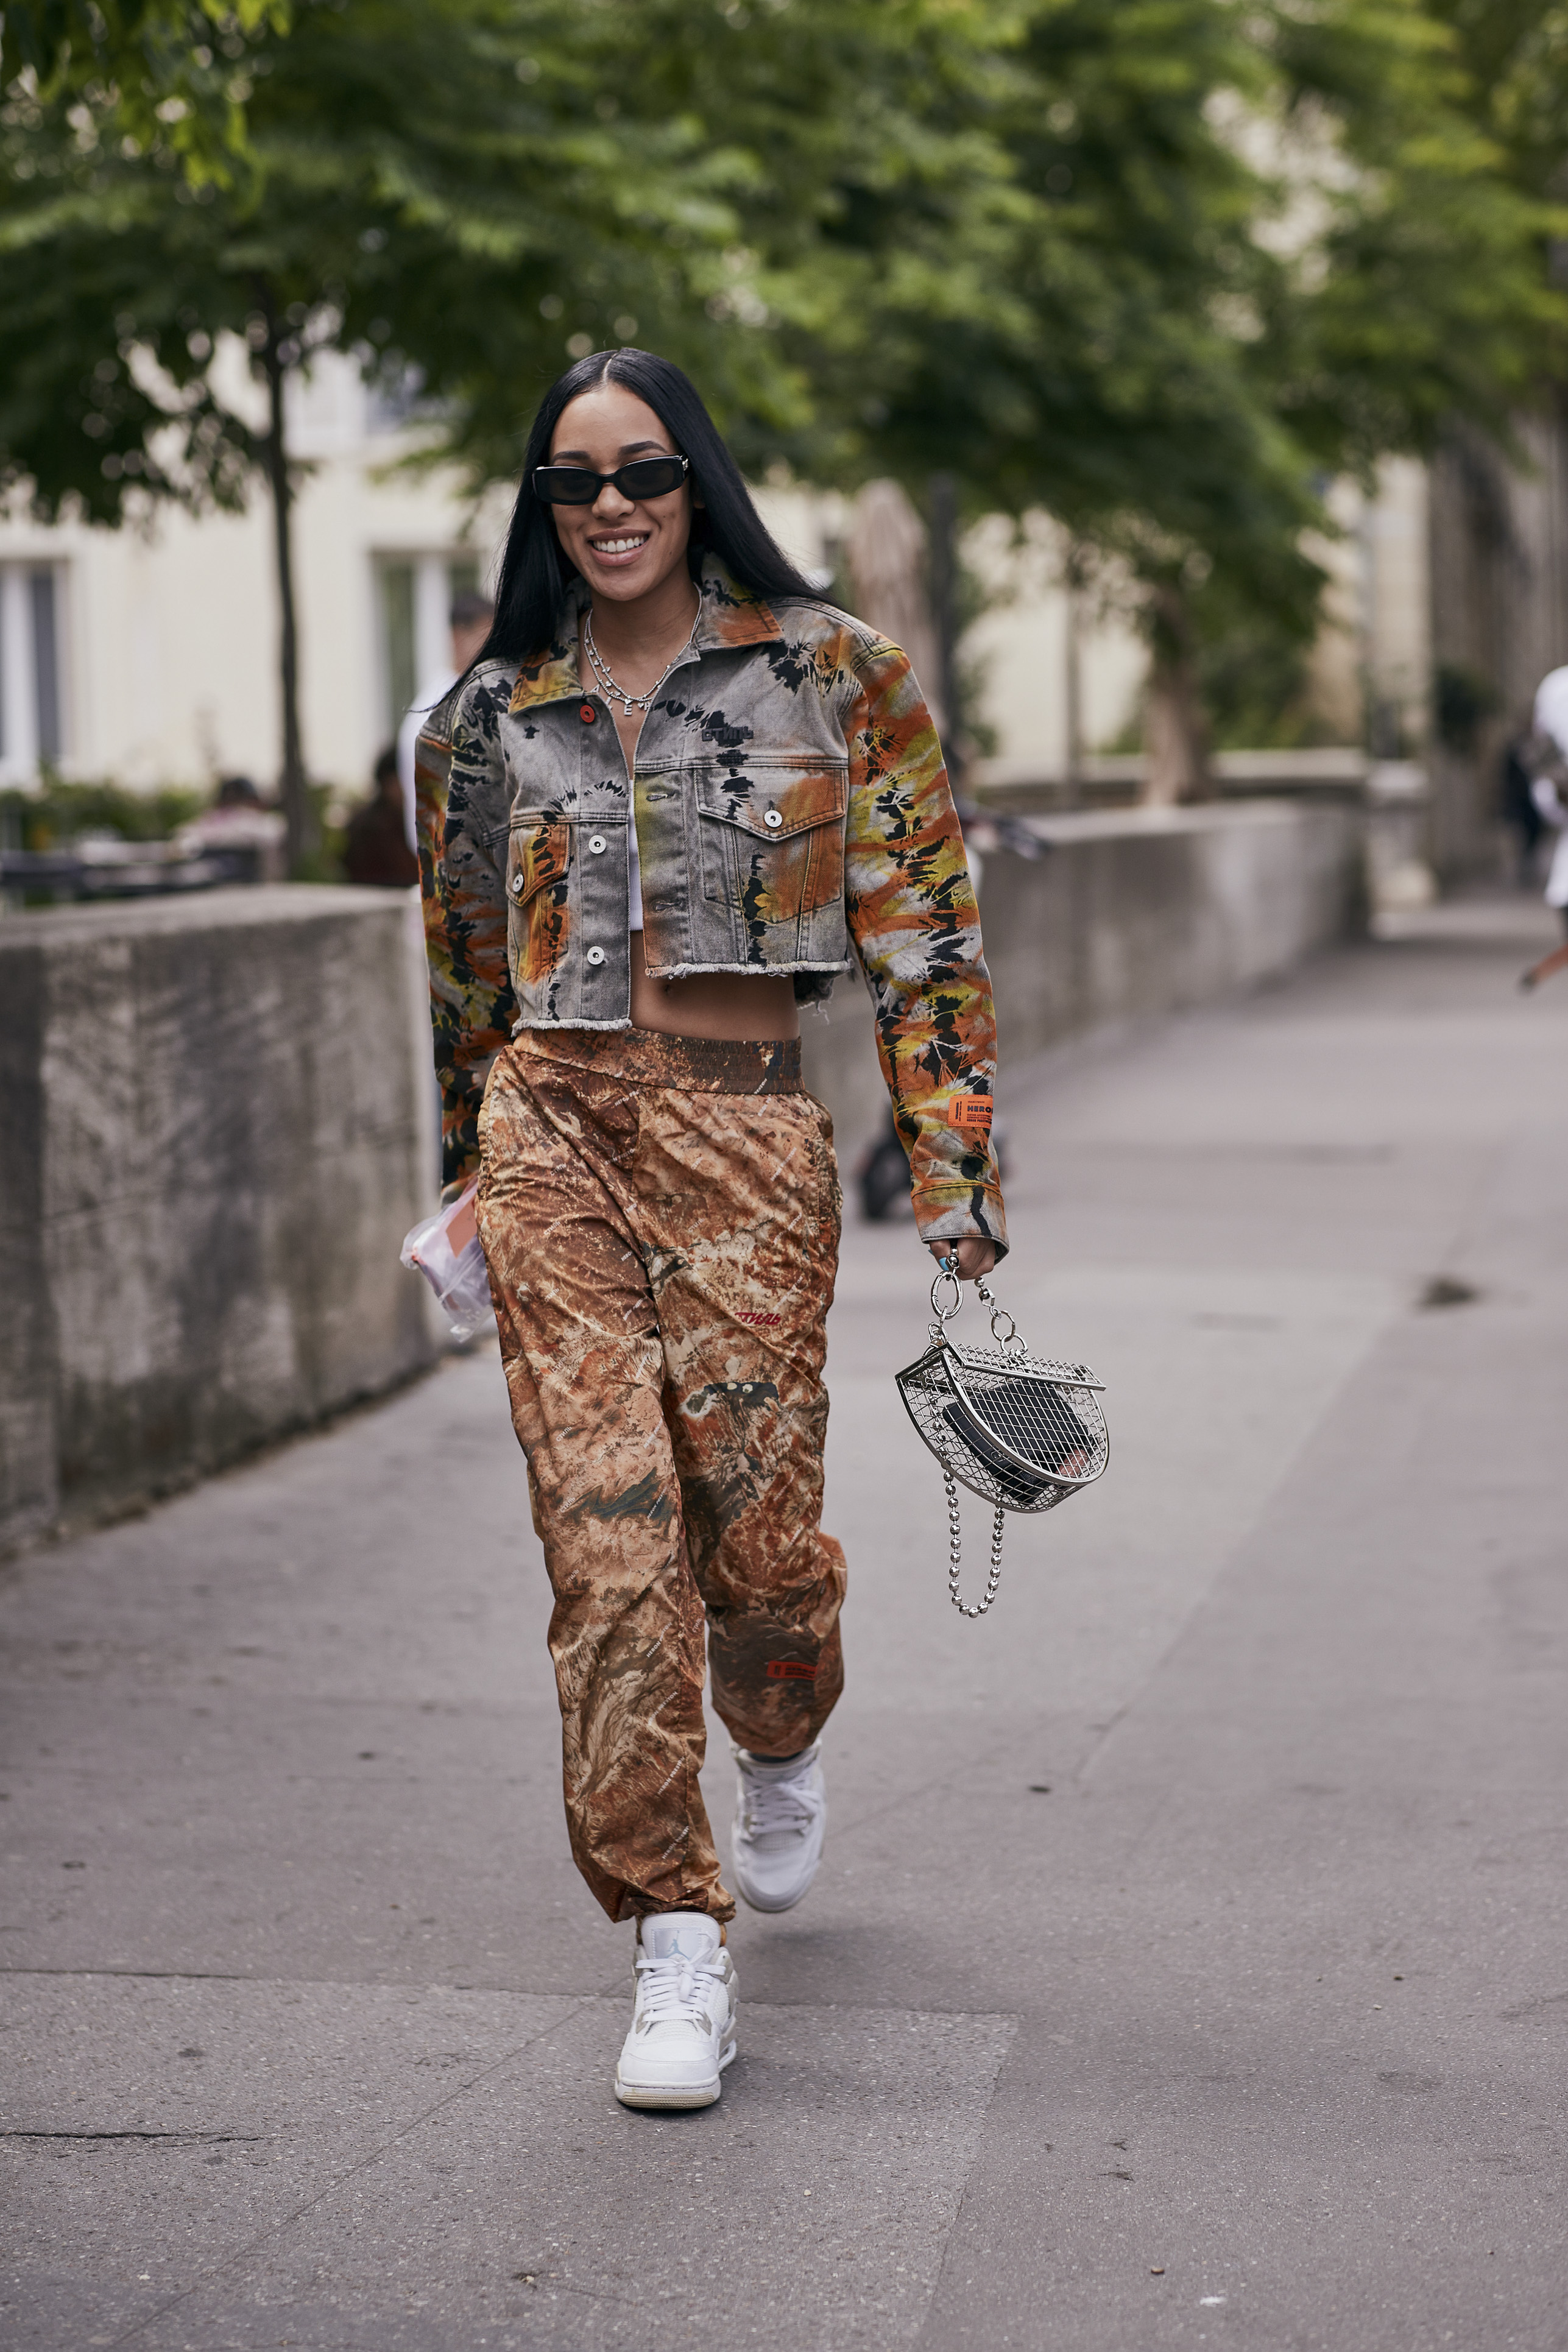 Paris Men's Street Style Spring 2020 More from DAY 1 | The Impression